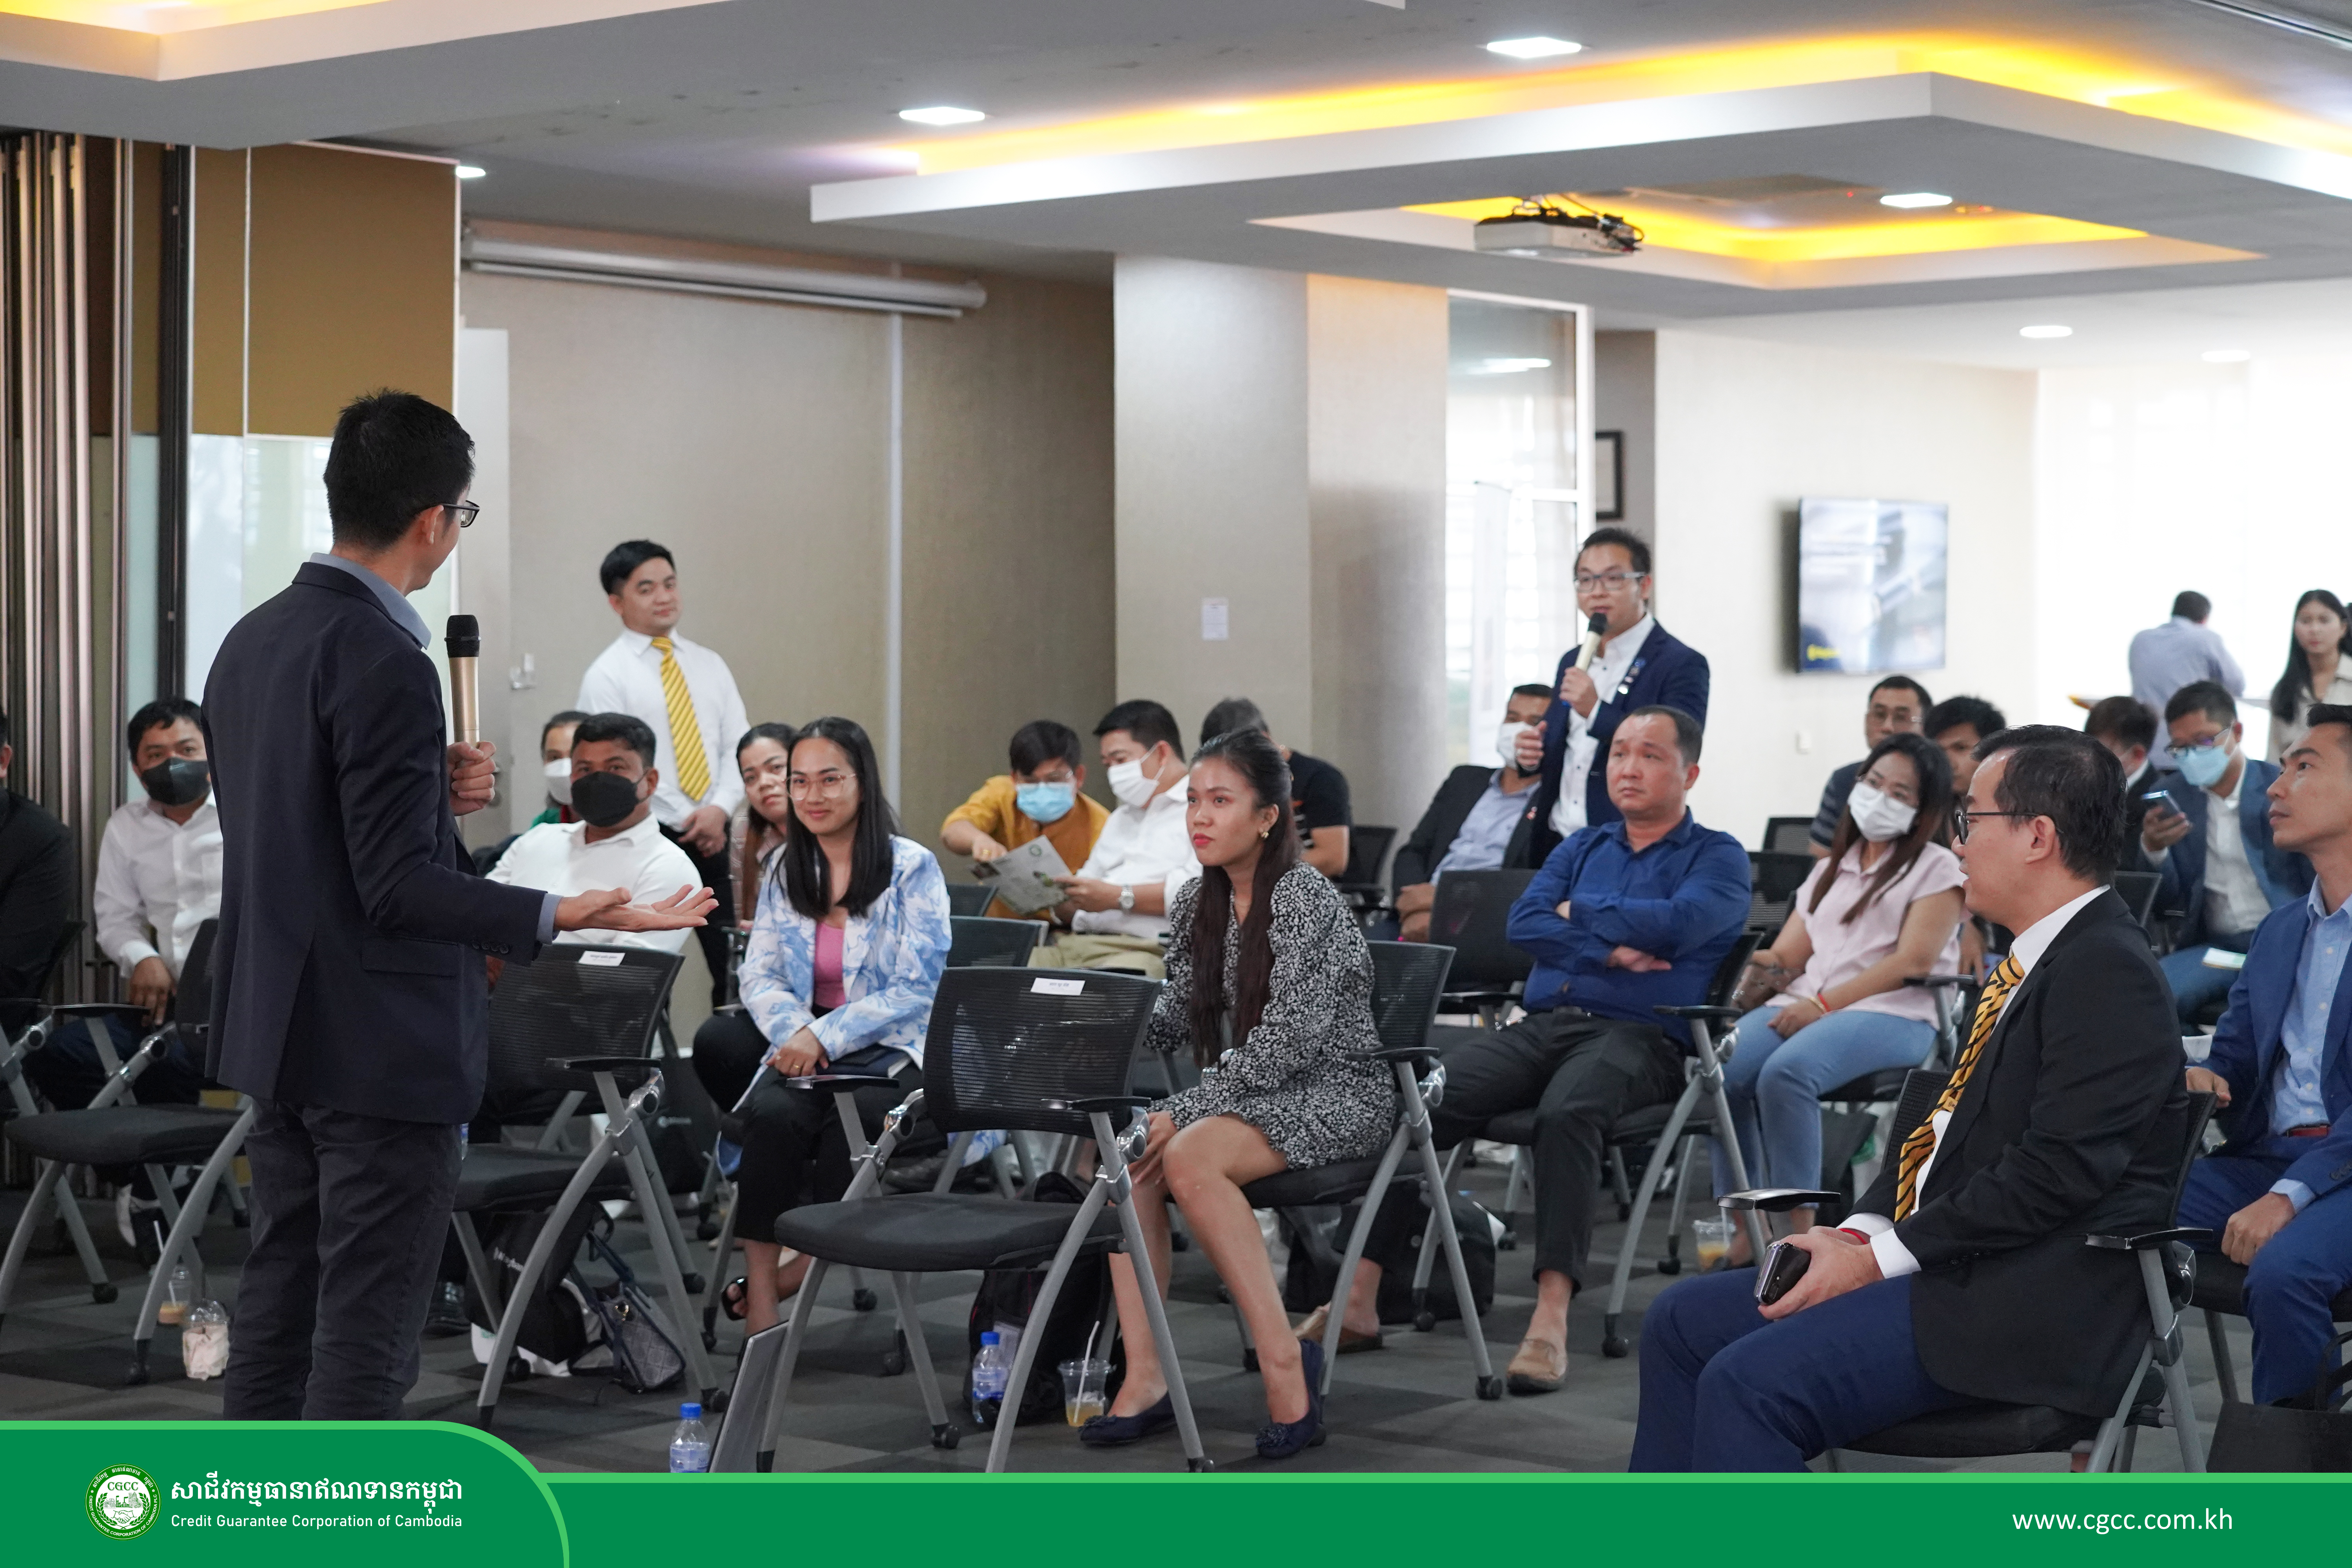 CGCC and Maybank Co-organized the “SME Building Capacity and Capability (BCC) Programme”